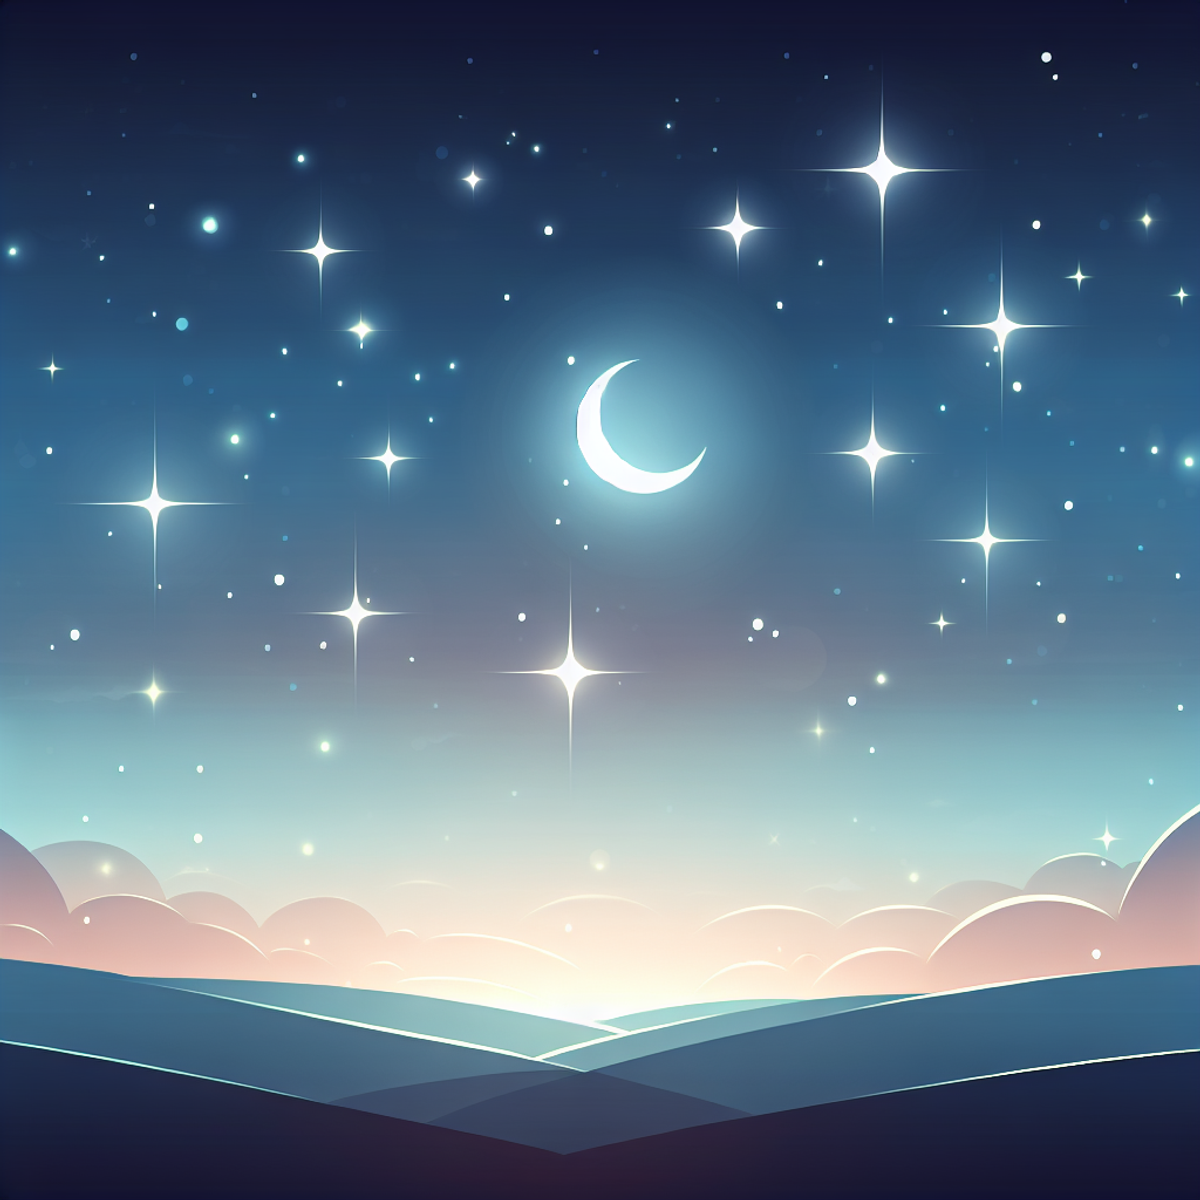 Alt text: A realistic painting of a clear night sky with a thin crescent moon and bright twinkling stars, creating a tranquil and peaceful scene.